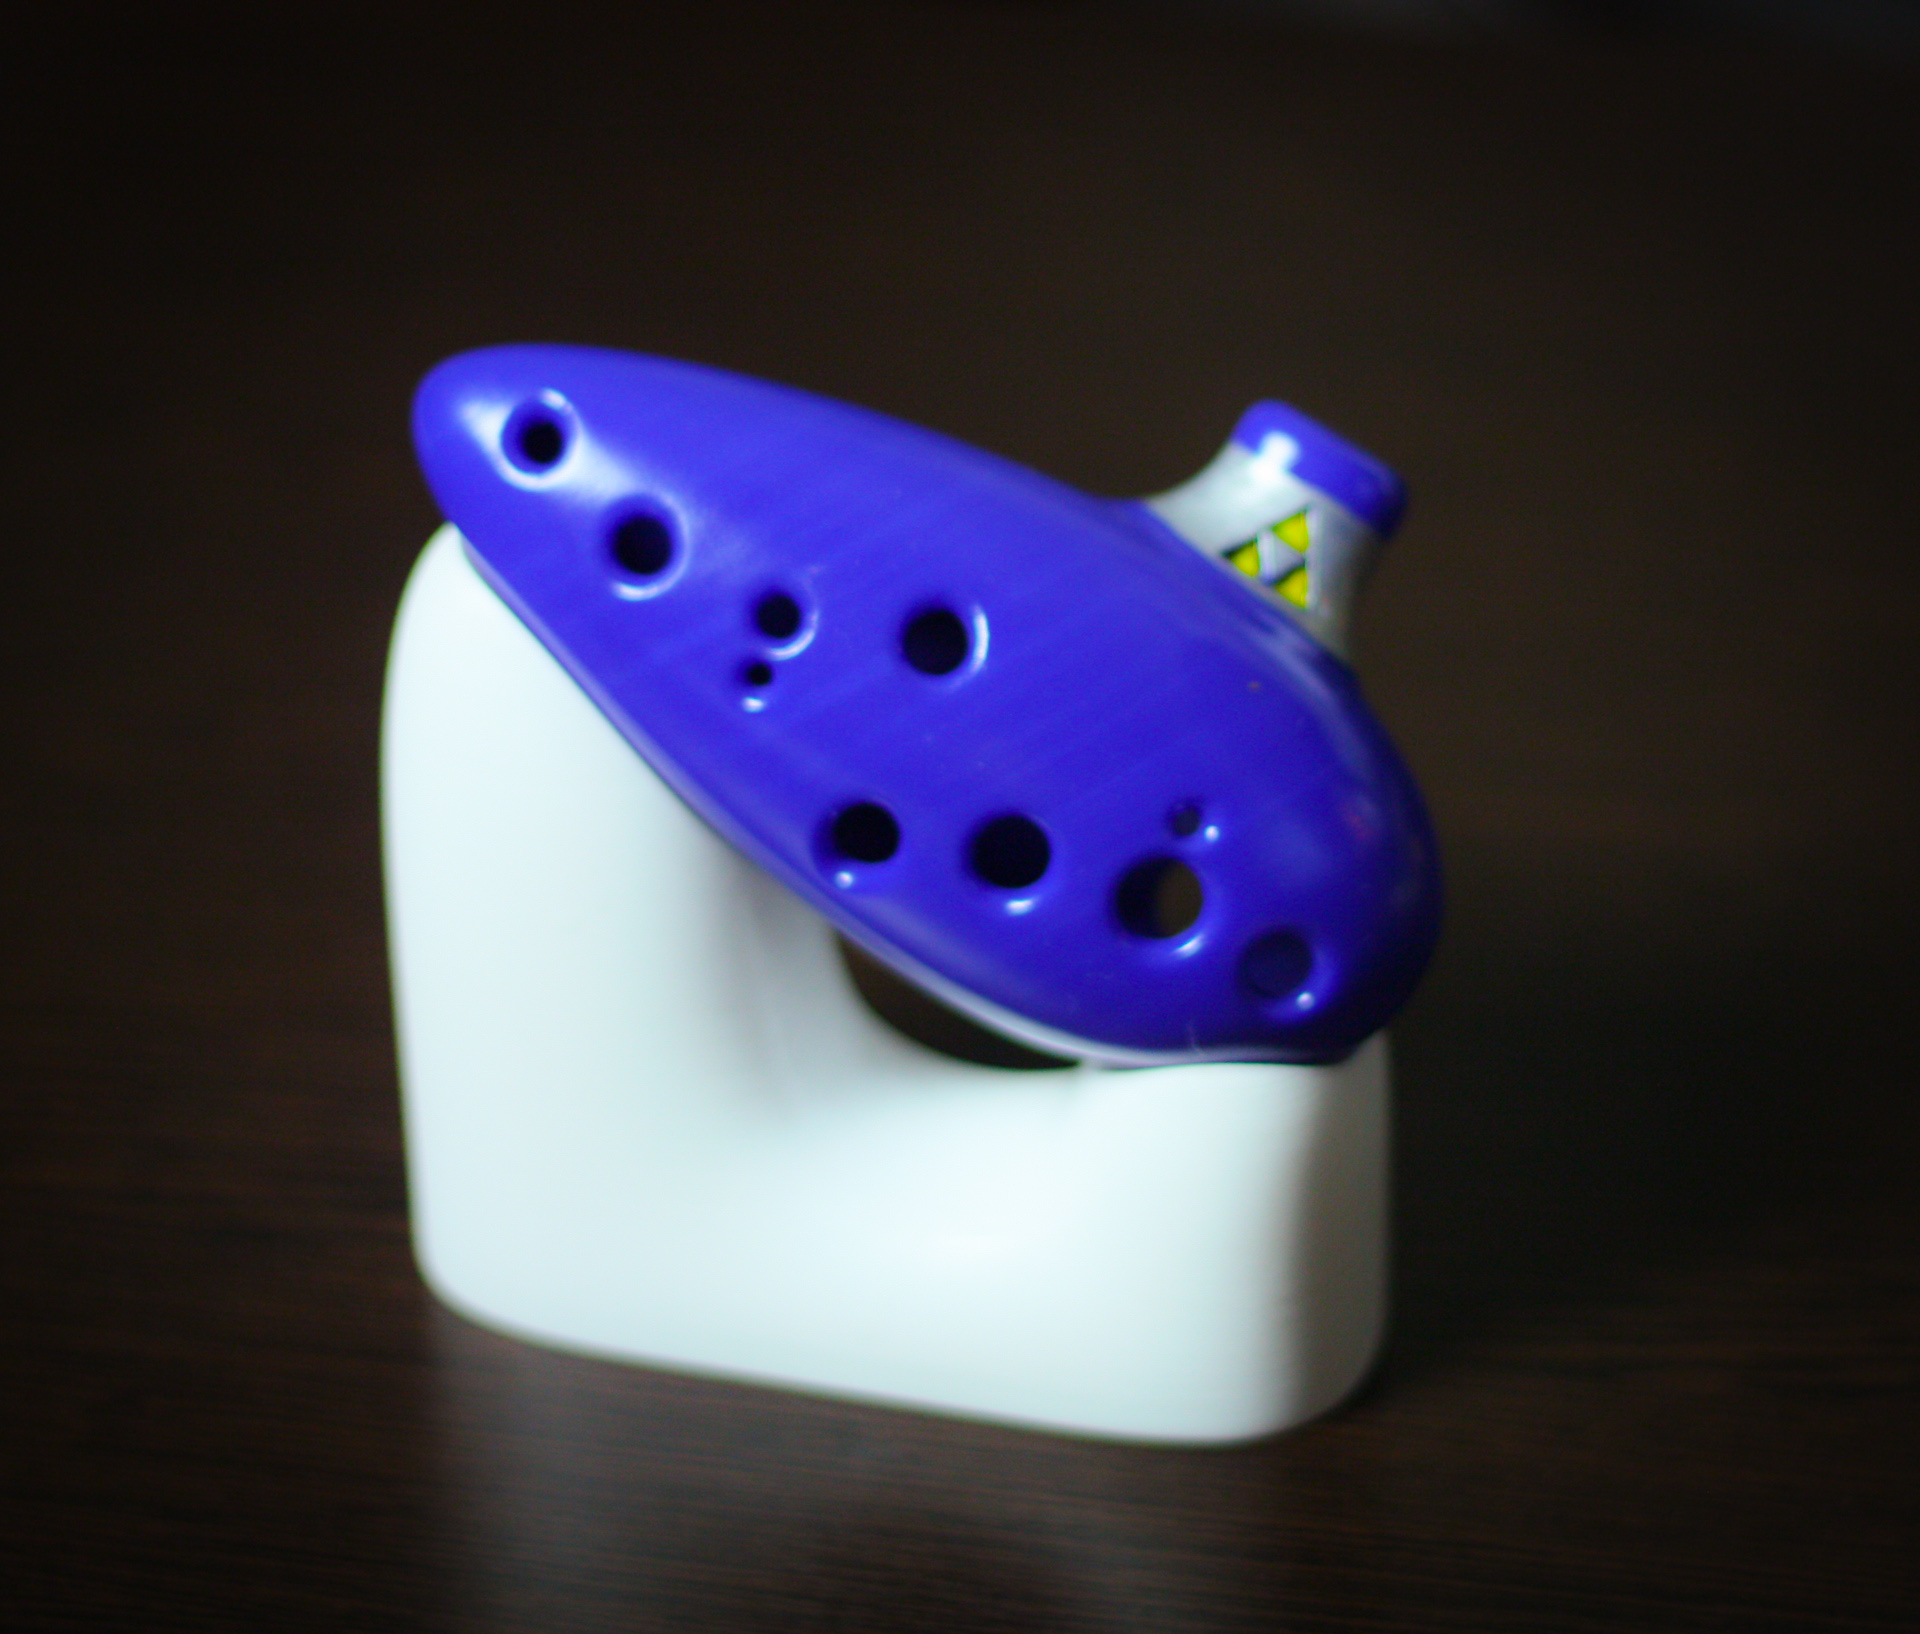 Ocarina of Time from The Legend of Zelda